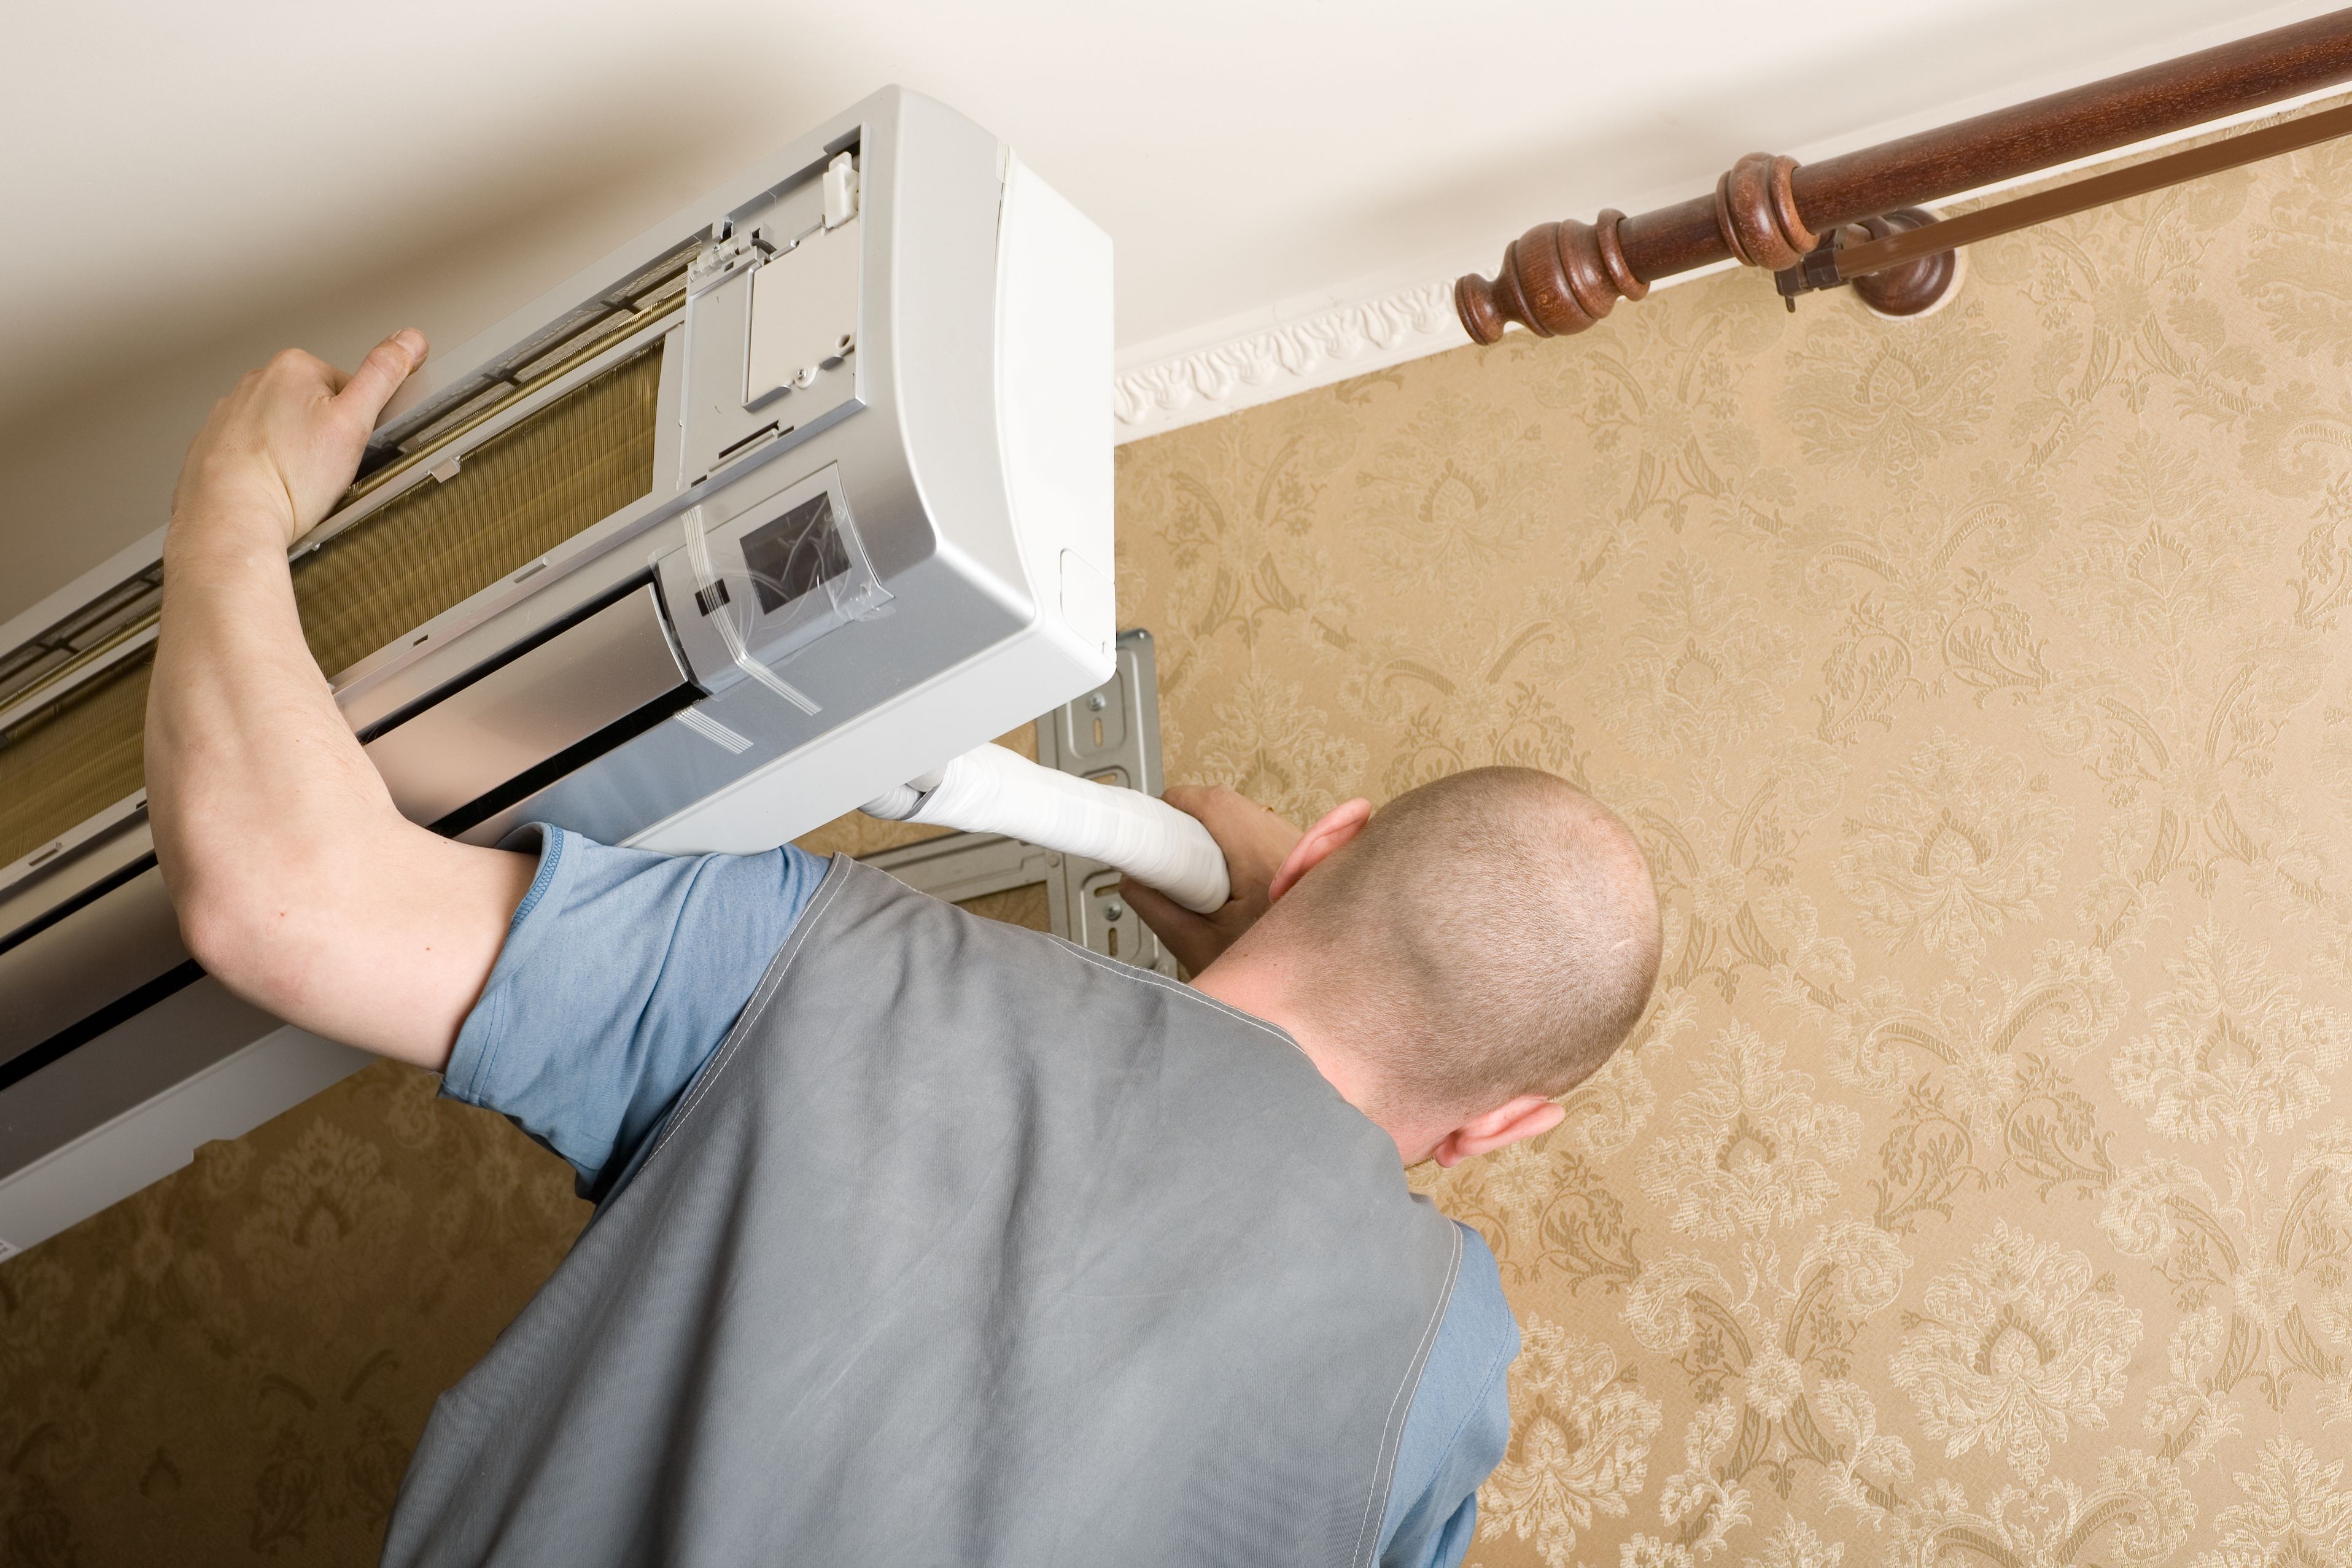 CALL THE PROFESSIONALS FOR AIR CONDITIONER REPAIR IN Moreno Valley CA